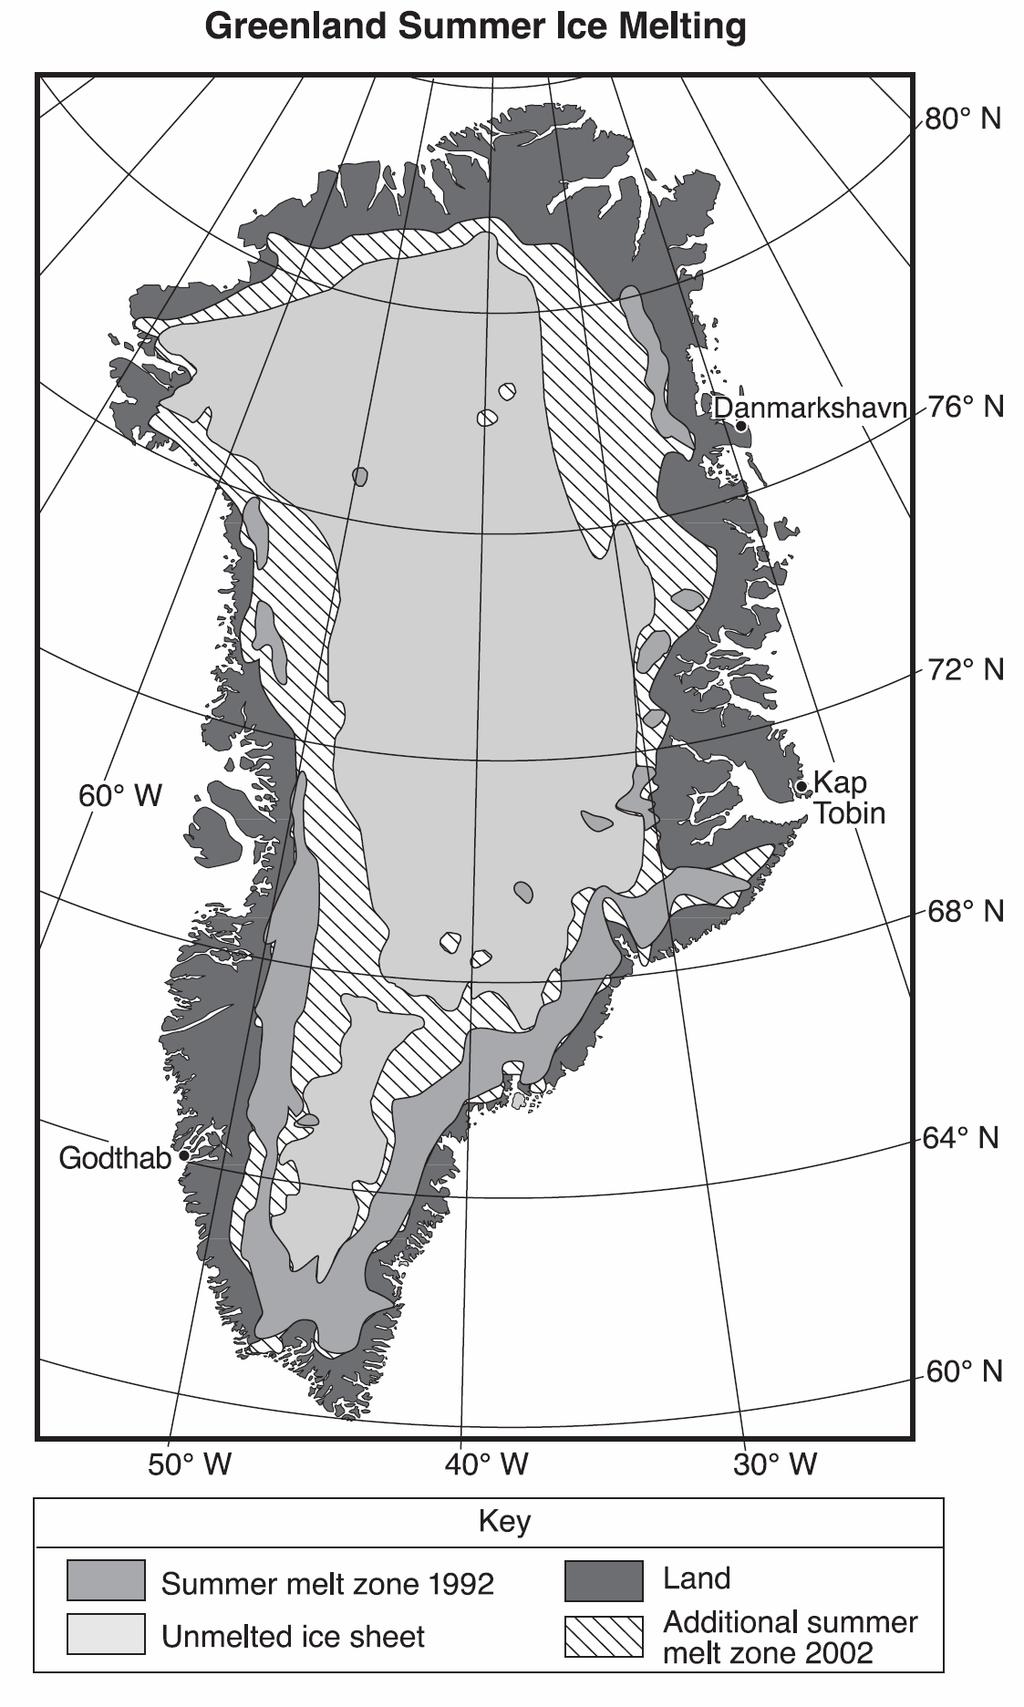 9. Base your answer to the following question on the following map and passage. The map shows the extent of summer ice-melt zones on Greenland in 1992 and 2002.